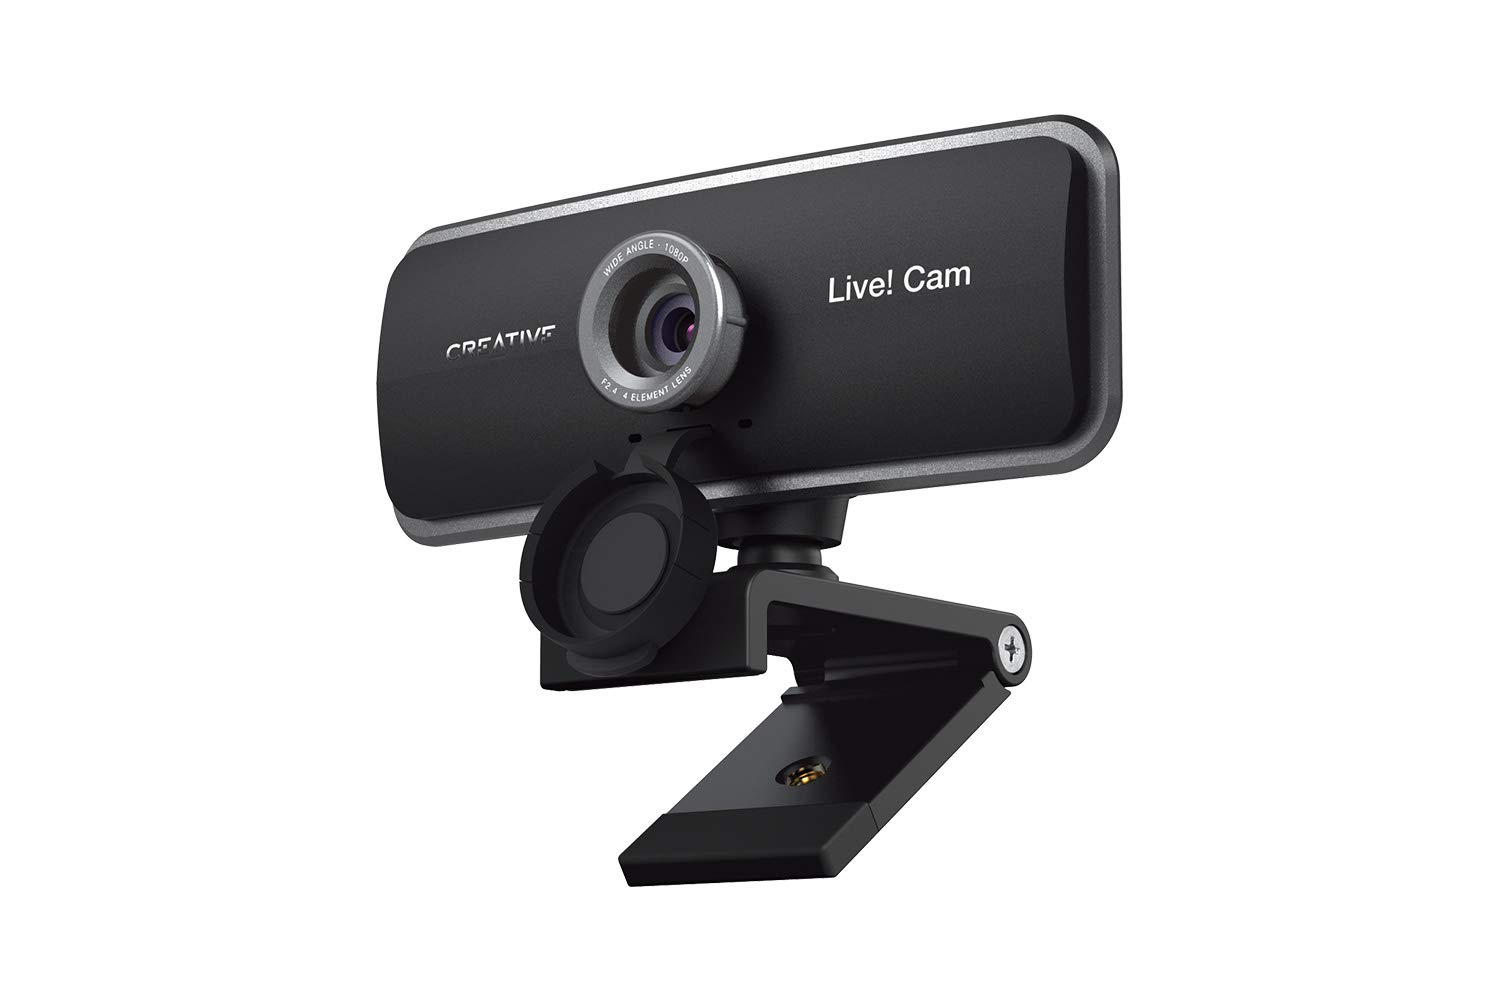 Creative Live! Cam Sync 1080p Full HD Wide-Angle USB Webcam with Dual Built-in Mic, Privacy Lens Cap, Universal Tripod Mount, High-res Video Callin...